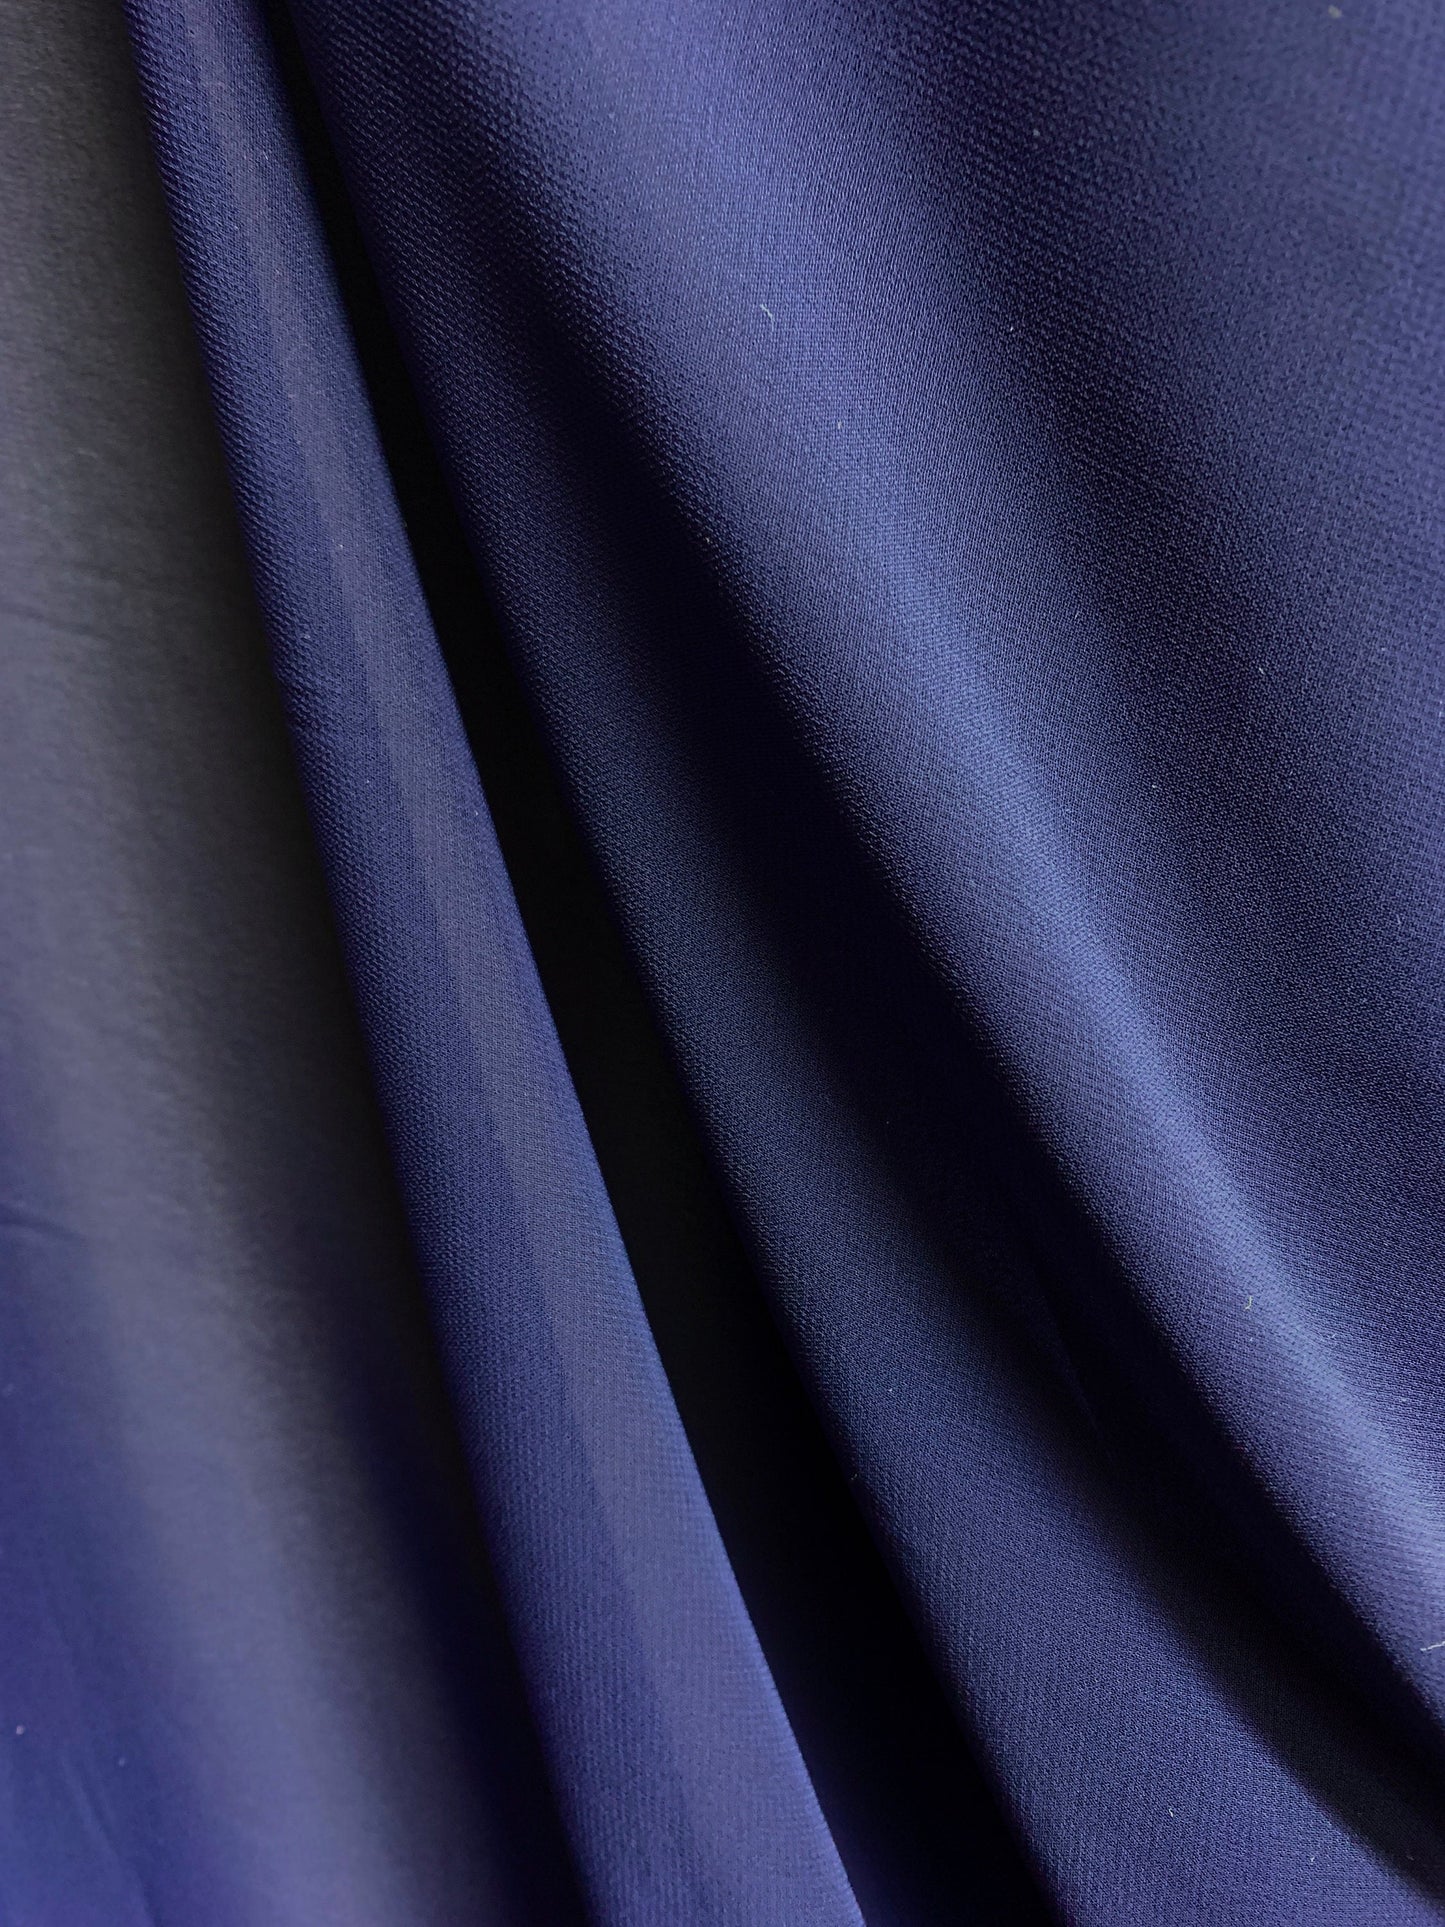 NAVY BLUE Sheer Solid Polyester Chiffon Fabric (60 in.) Sold By The Yard